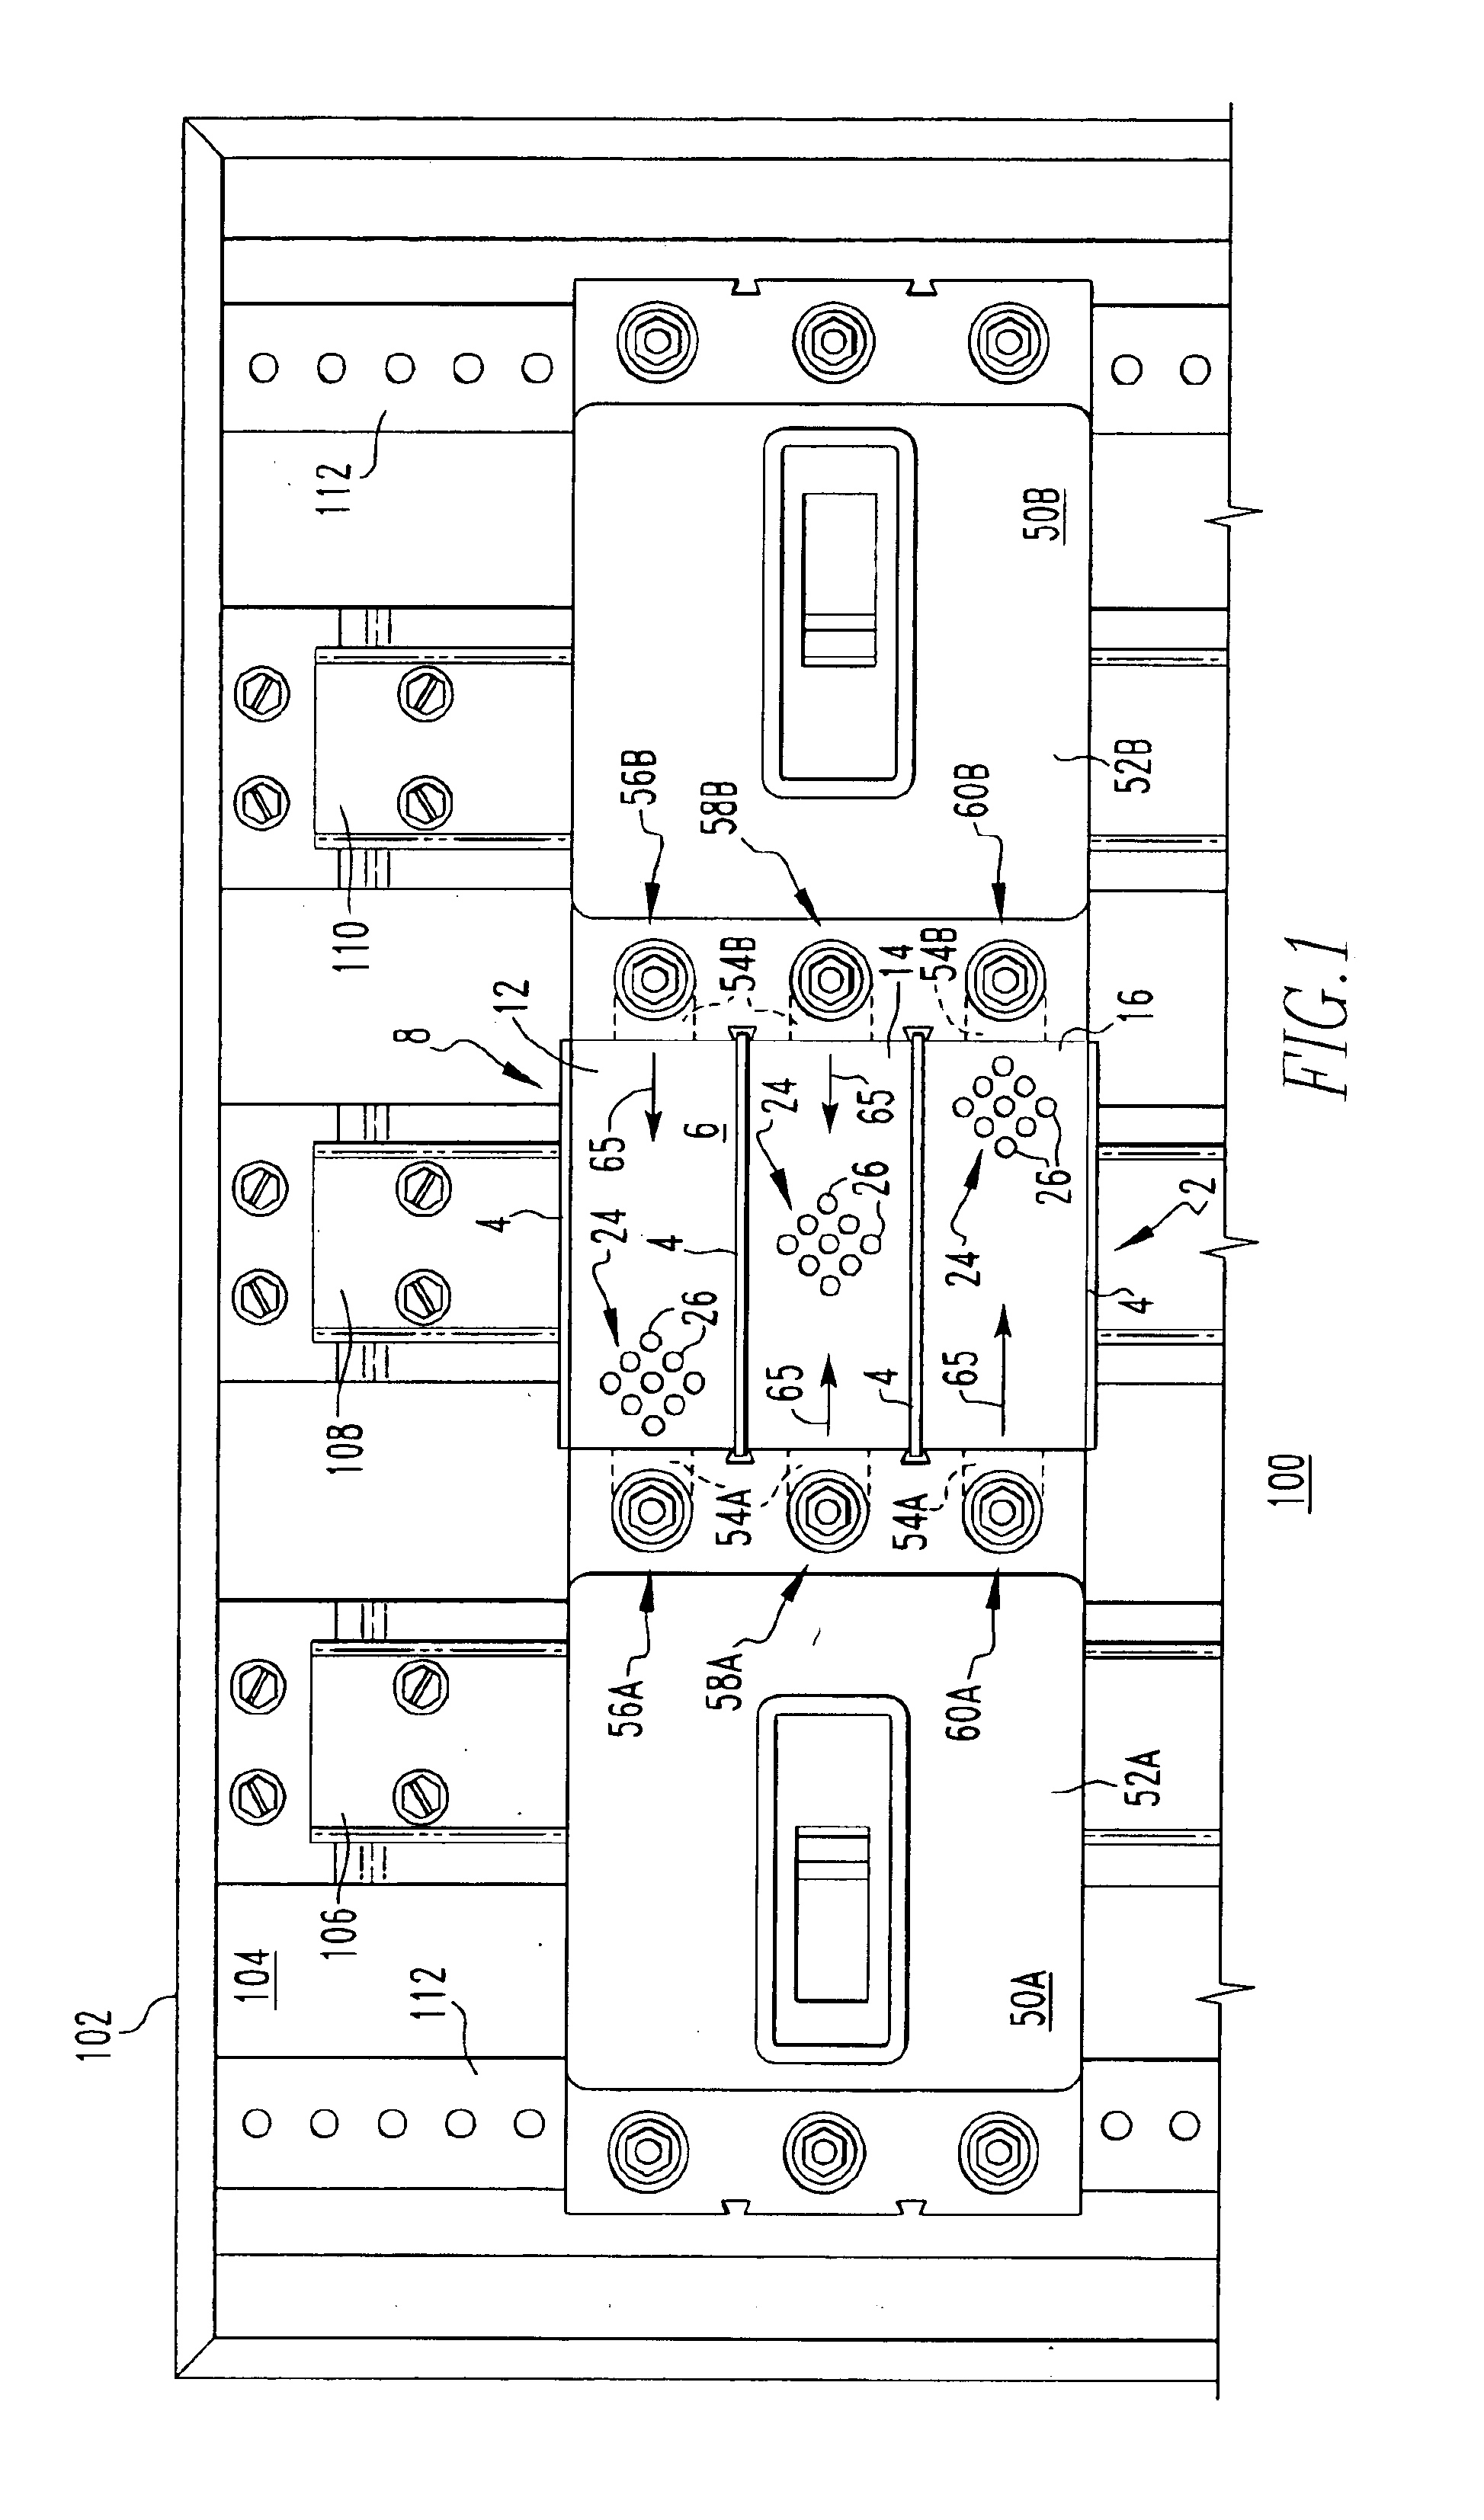 Gas segregator barrier for electrical switching apparatus